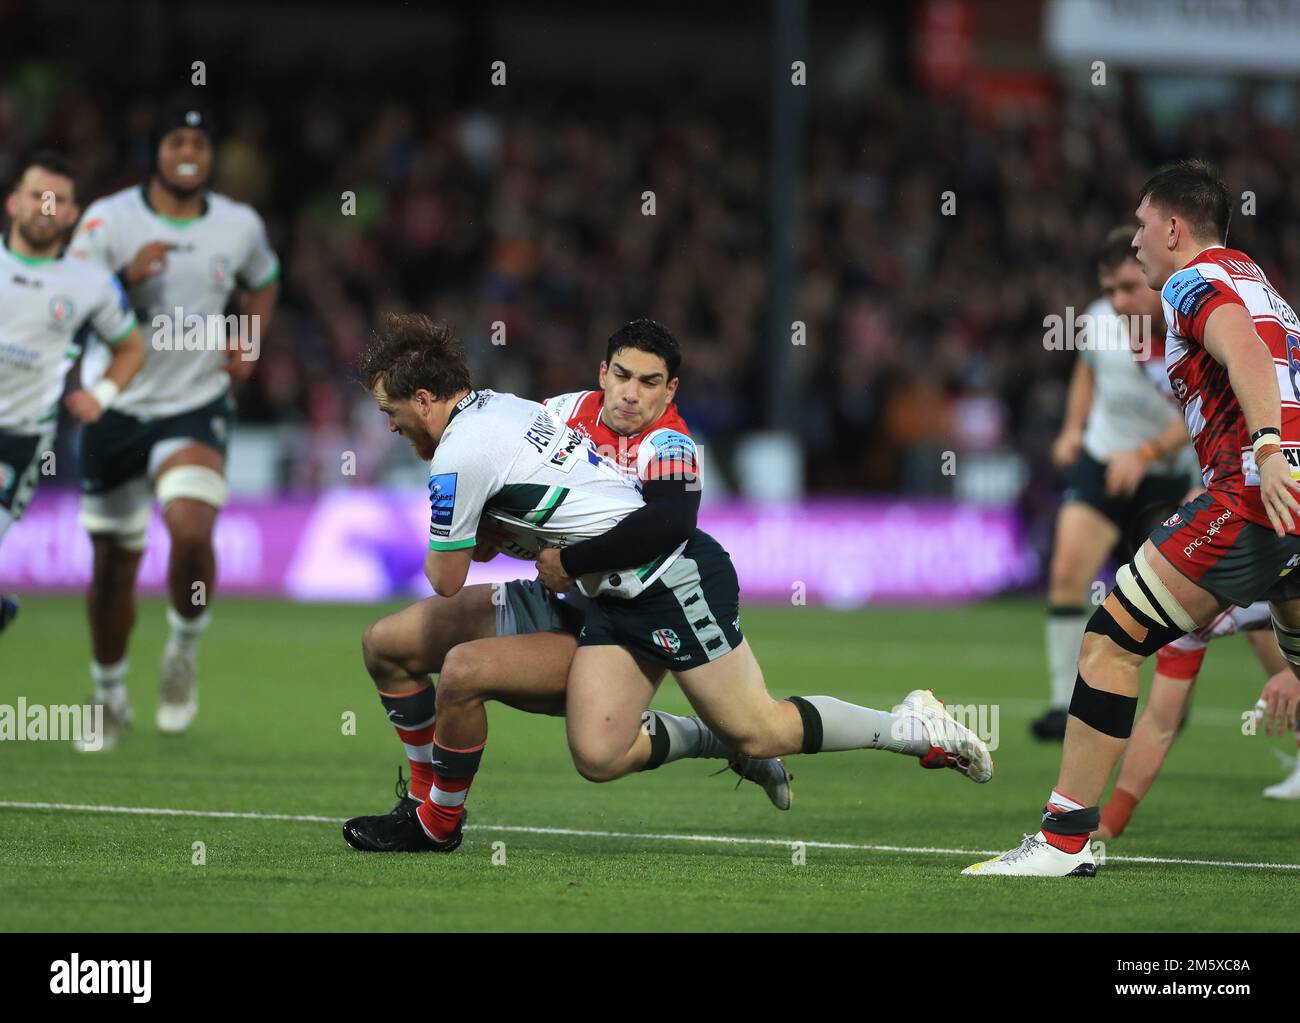 London Irish's Rory Jennings tackled by Gloucester Rugby's Santiago Carreras during the Gallagher Premiership match at Kingsholm Stadium, Gloucester. Picture date: Saturday December 31, 2022. Stock Photo